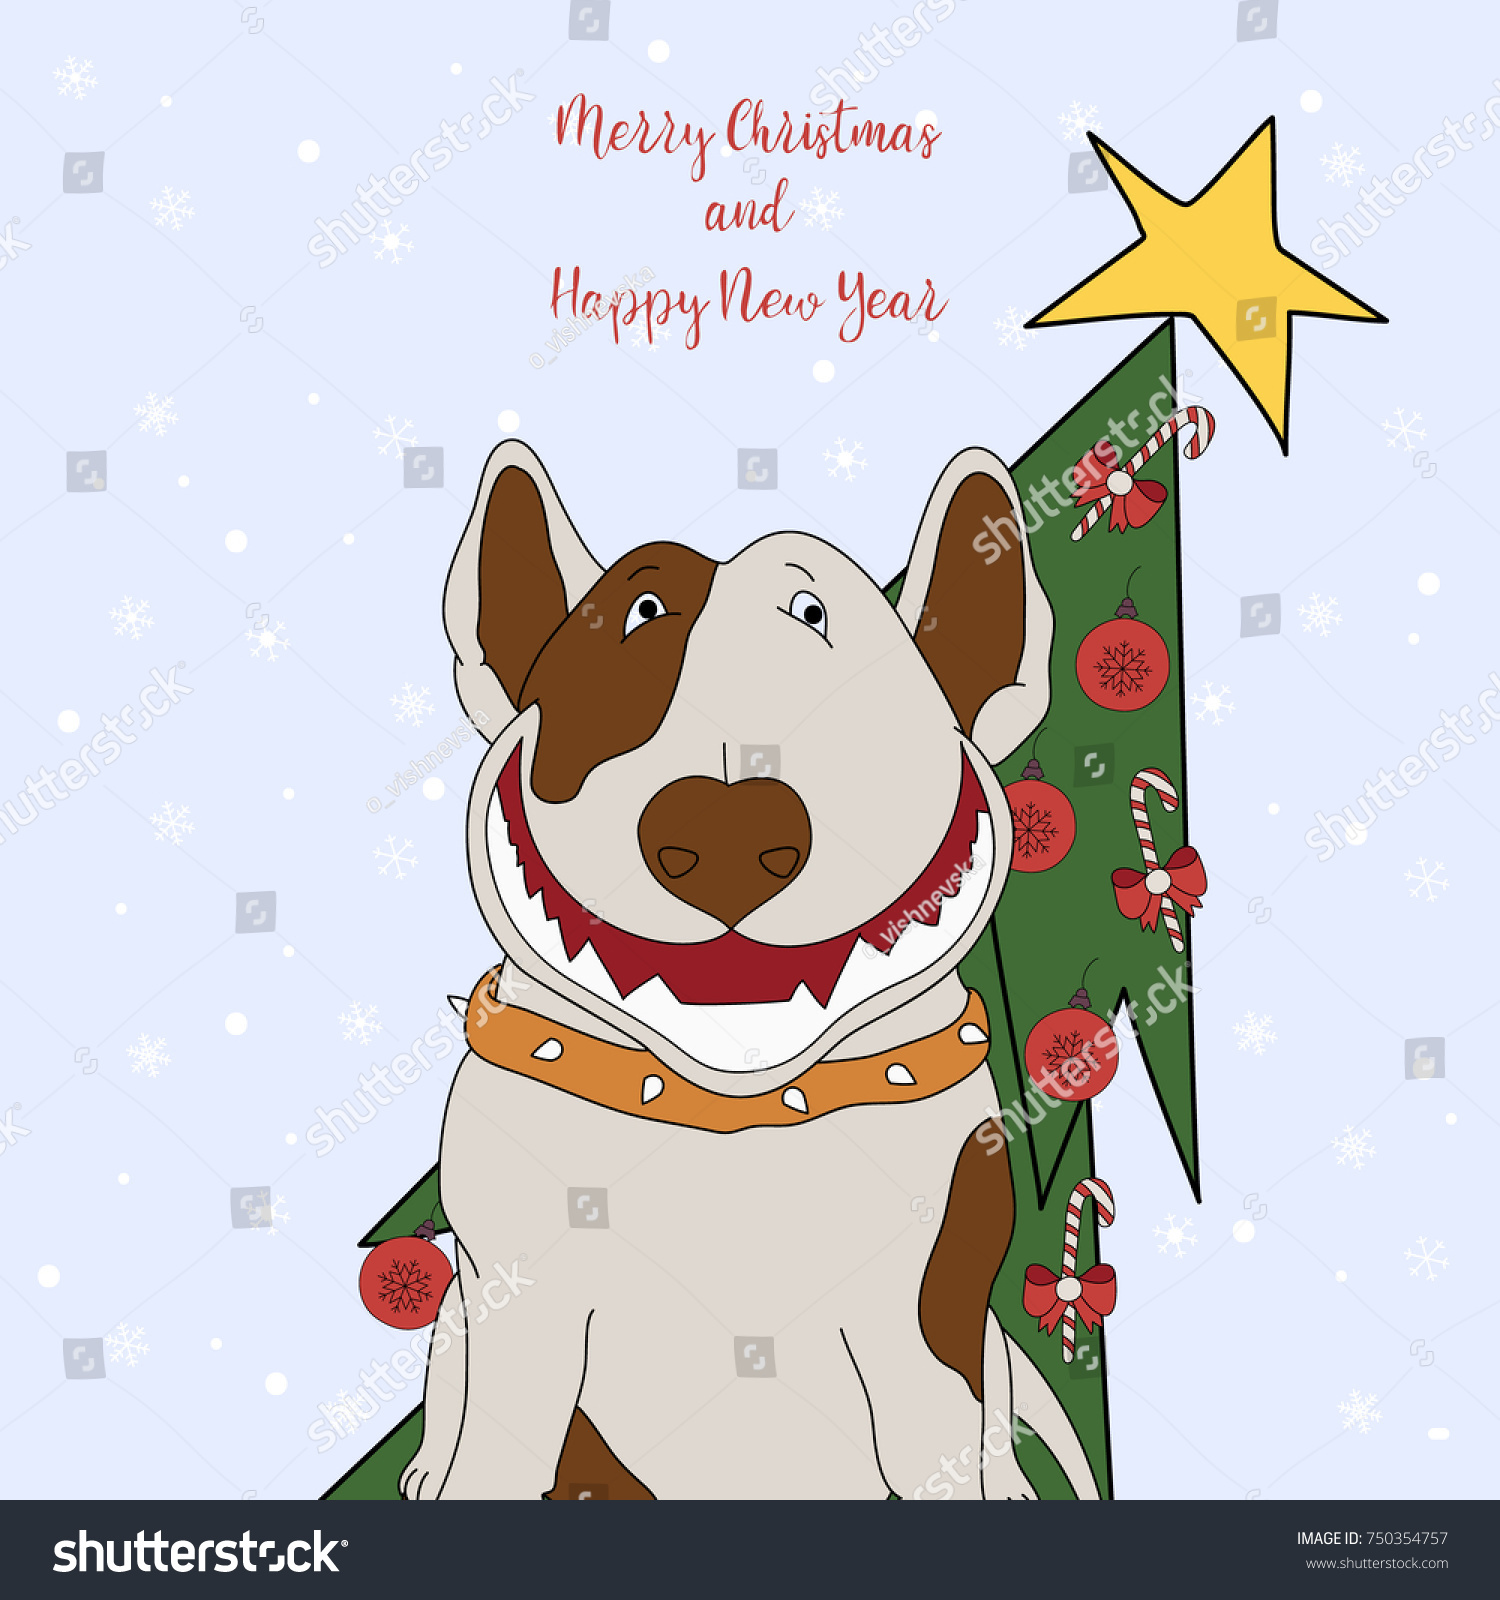 Merry Christmas and Happy New Year Cartoon greeting card with a smiling dog with a